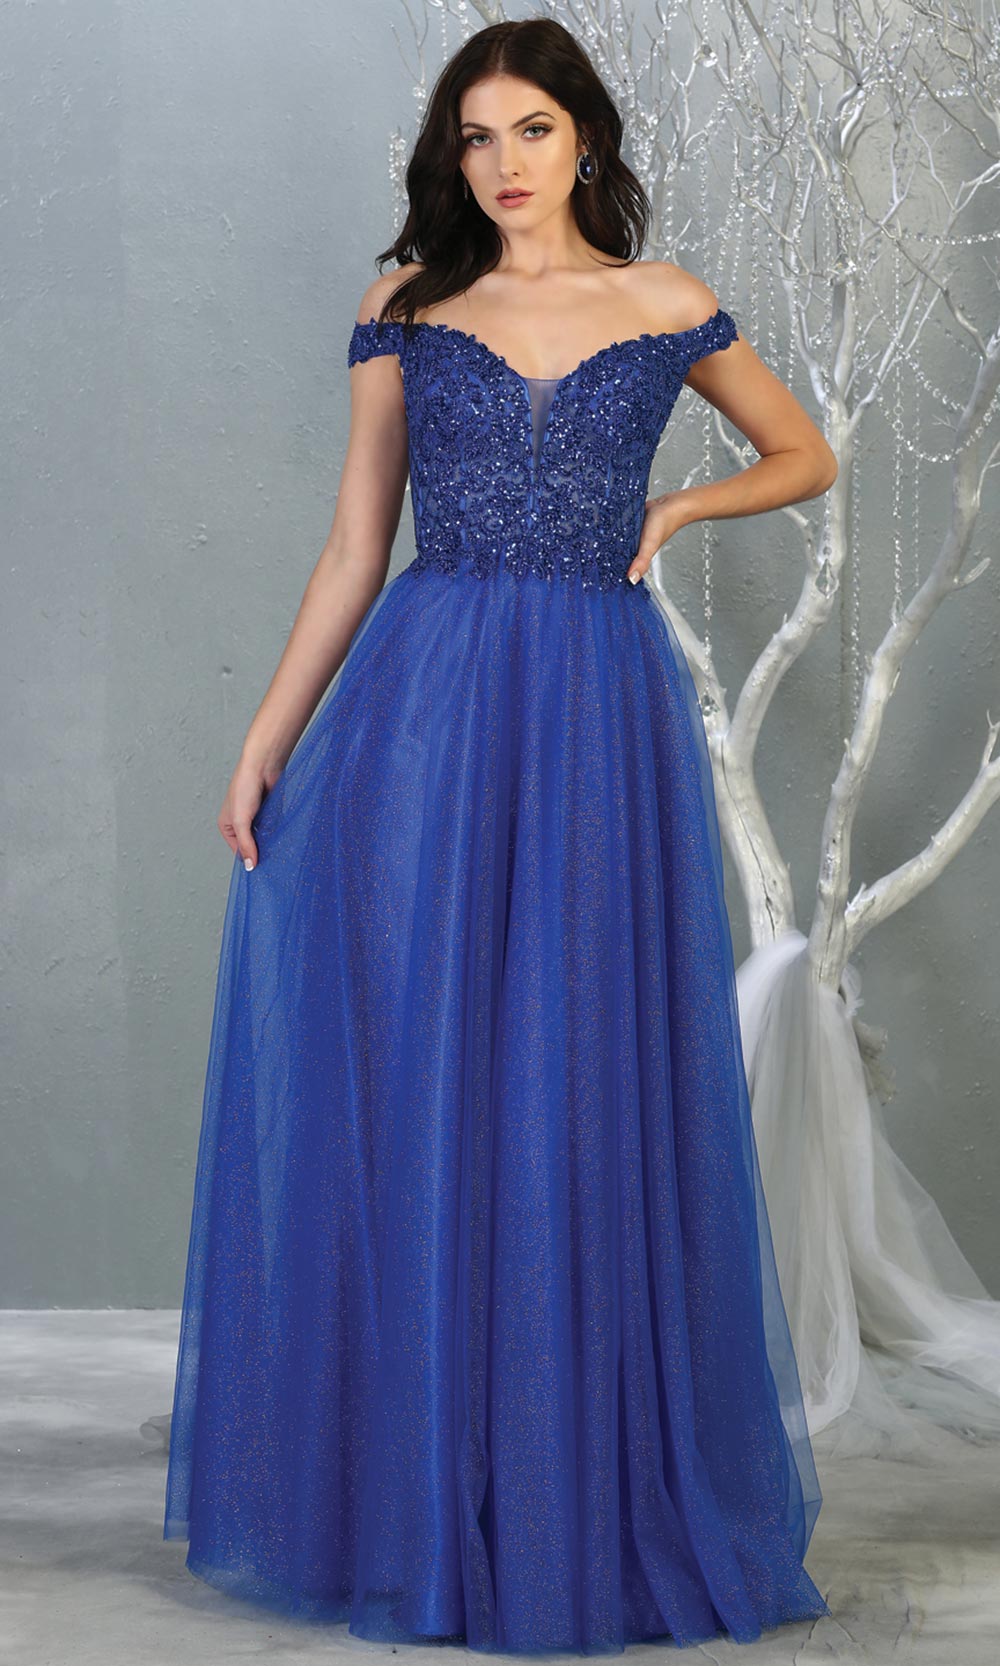 Mayqueen RQ7864 long royal blue off shoulder sequin top evening gown. Full length flowy dress w/ tulle skirt is perfect for  enagagement/e-shoot dress, sweet 16, debut, formal evening party dress, prom, engagement, wedding reception. Plus sizes avail.jpg